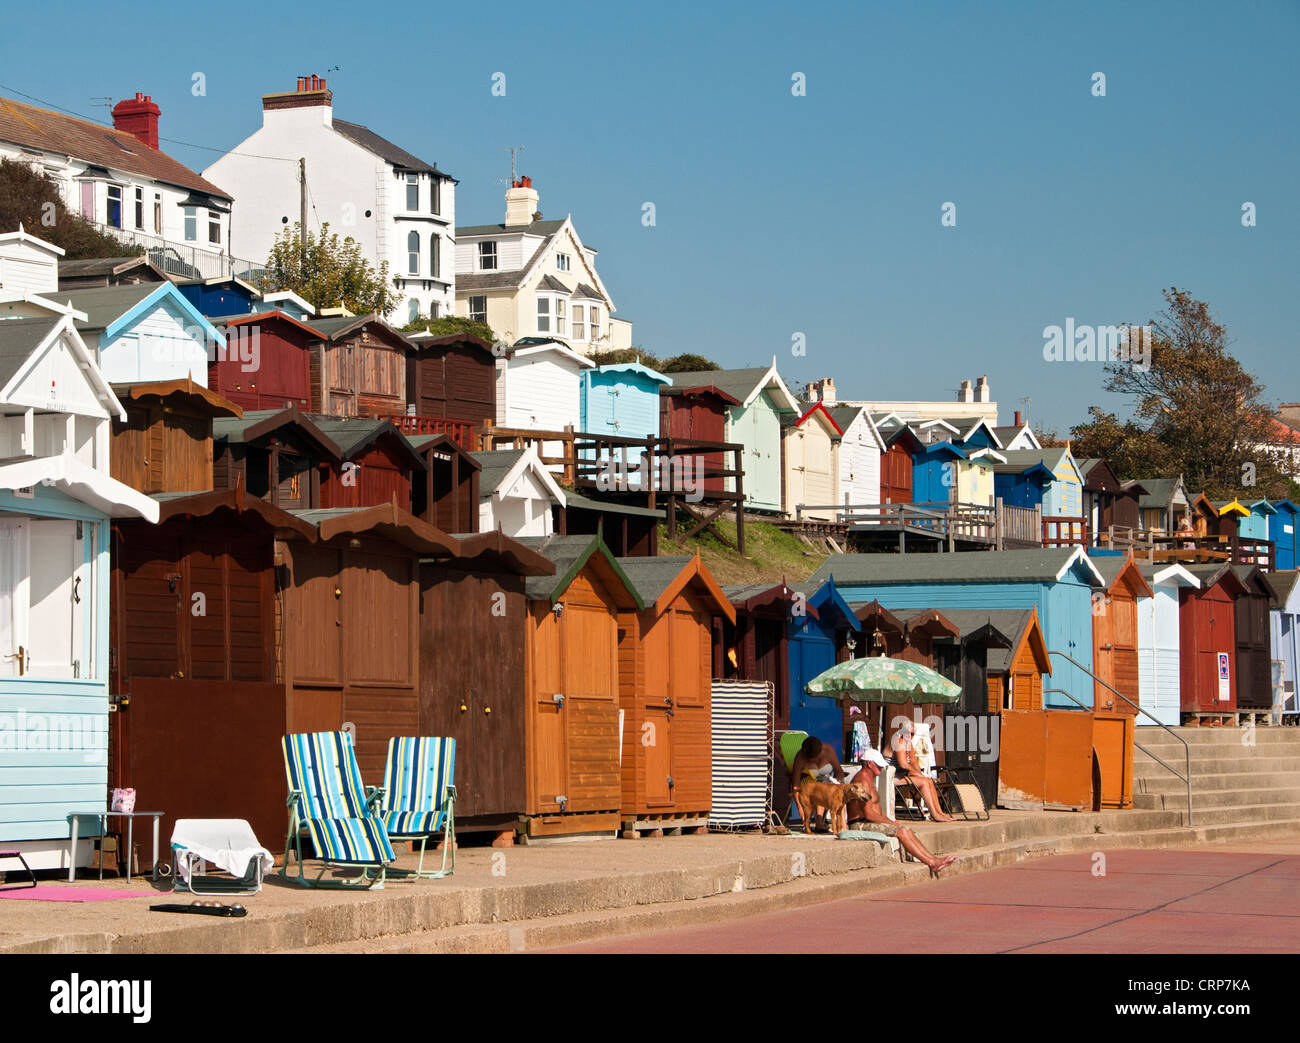 People relaxing in front of beach huts along the seafront at Walton-on-the-Naze. Stock Photo